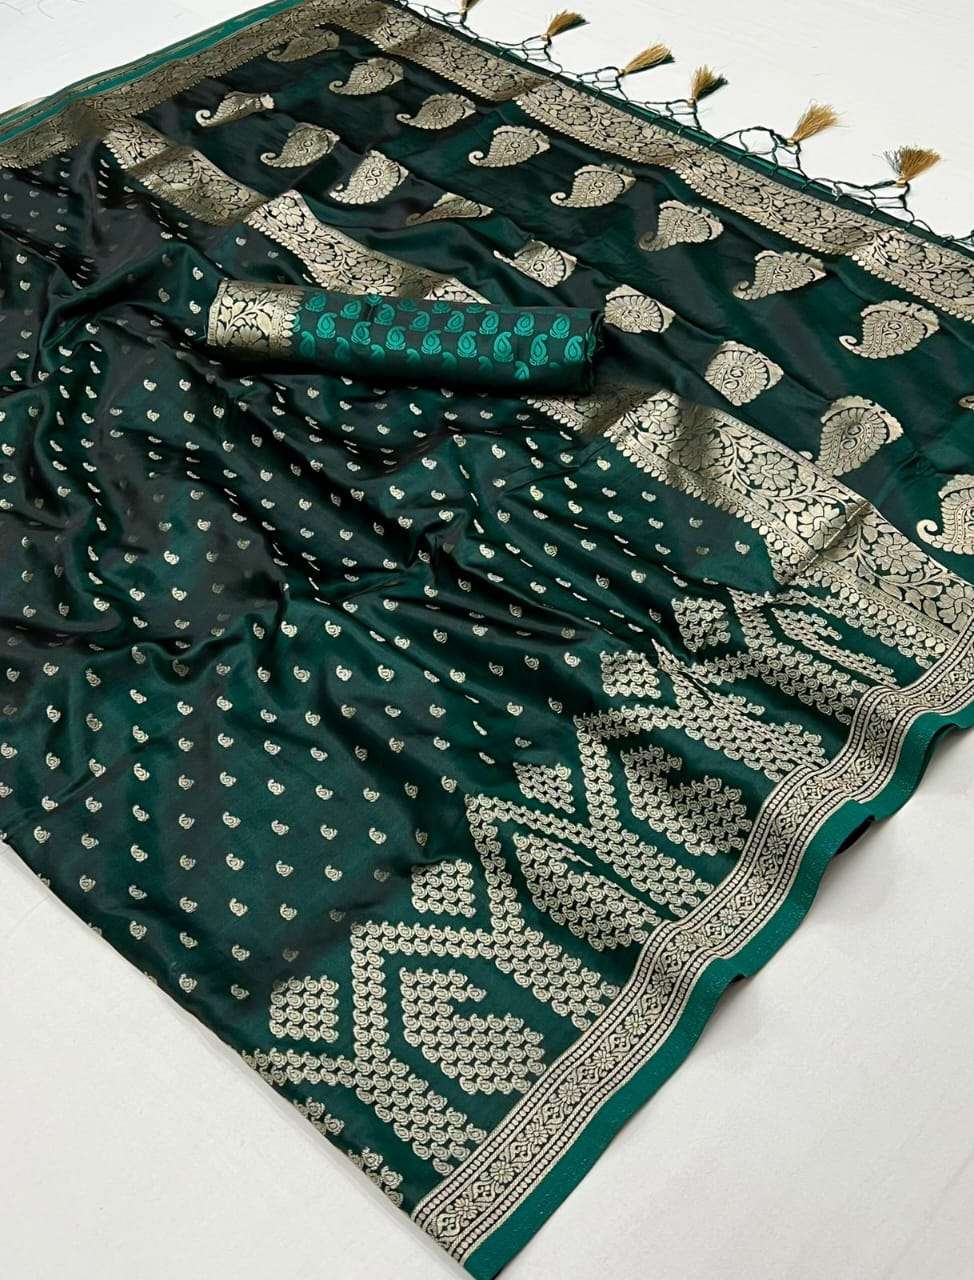 Kontina Satin silk with Weaving Design Fancy saree collection at best rate